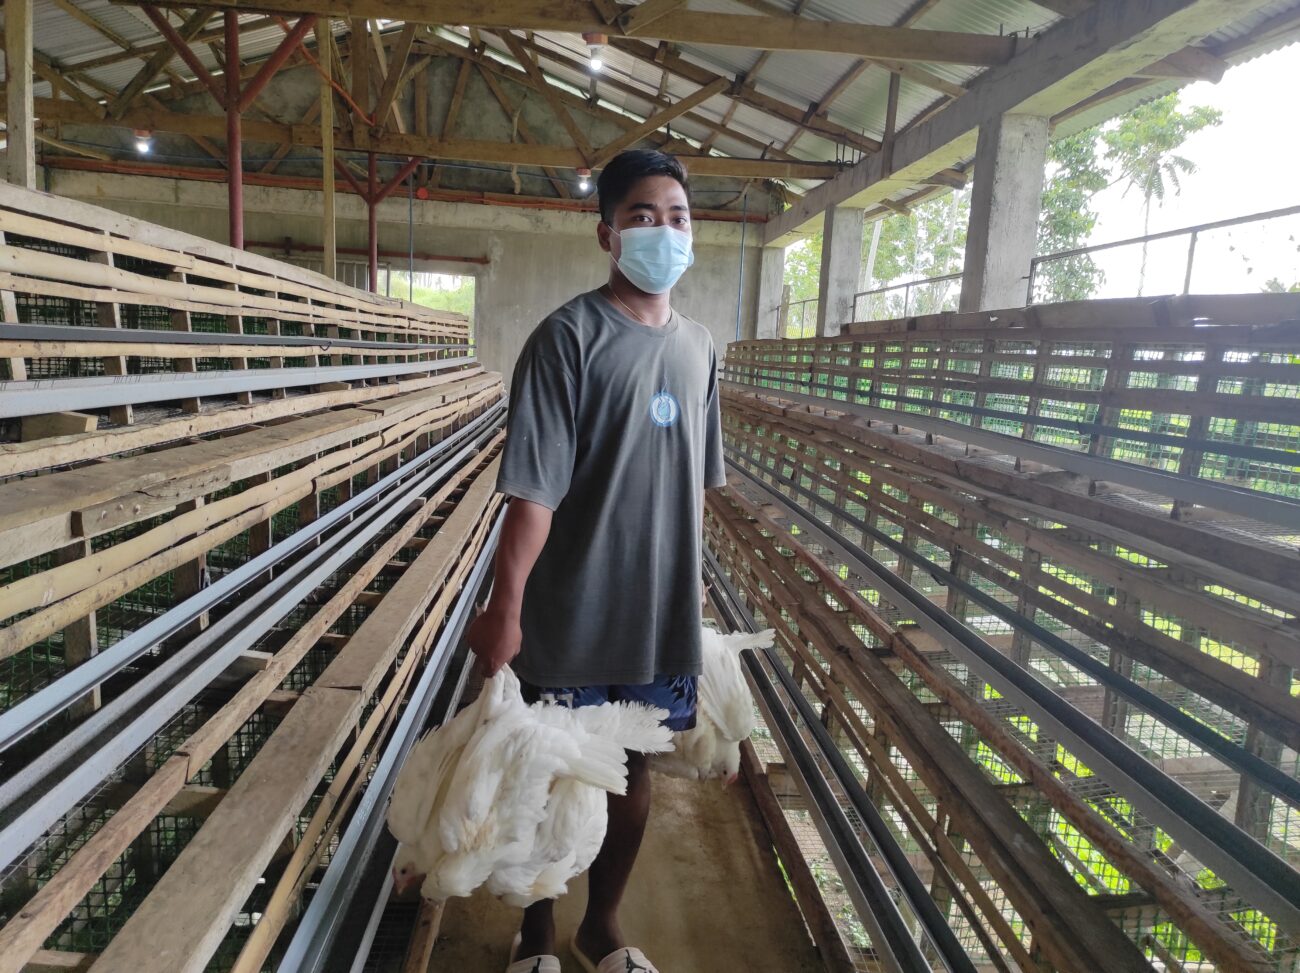 Donors from Salesian Missions provide Don Bosco Agro-Mechanical Technology Center in the Philippines with funding for 1,000 chickens to support farming entrepreneurship.